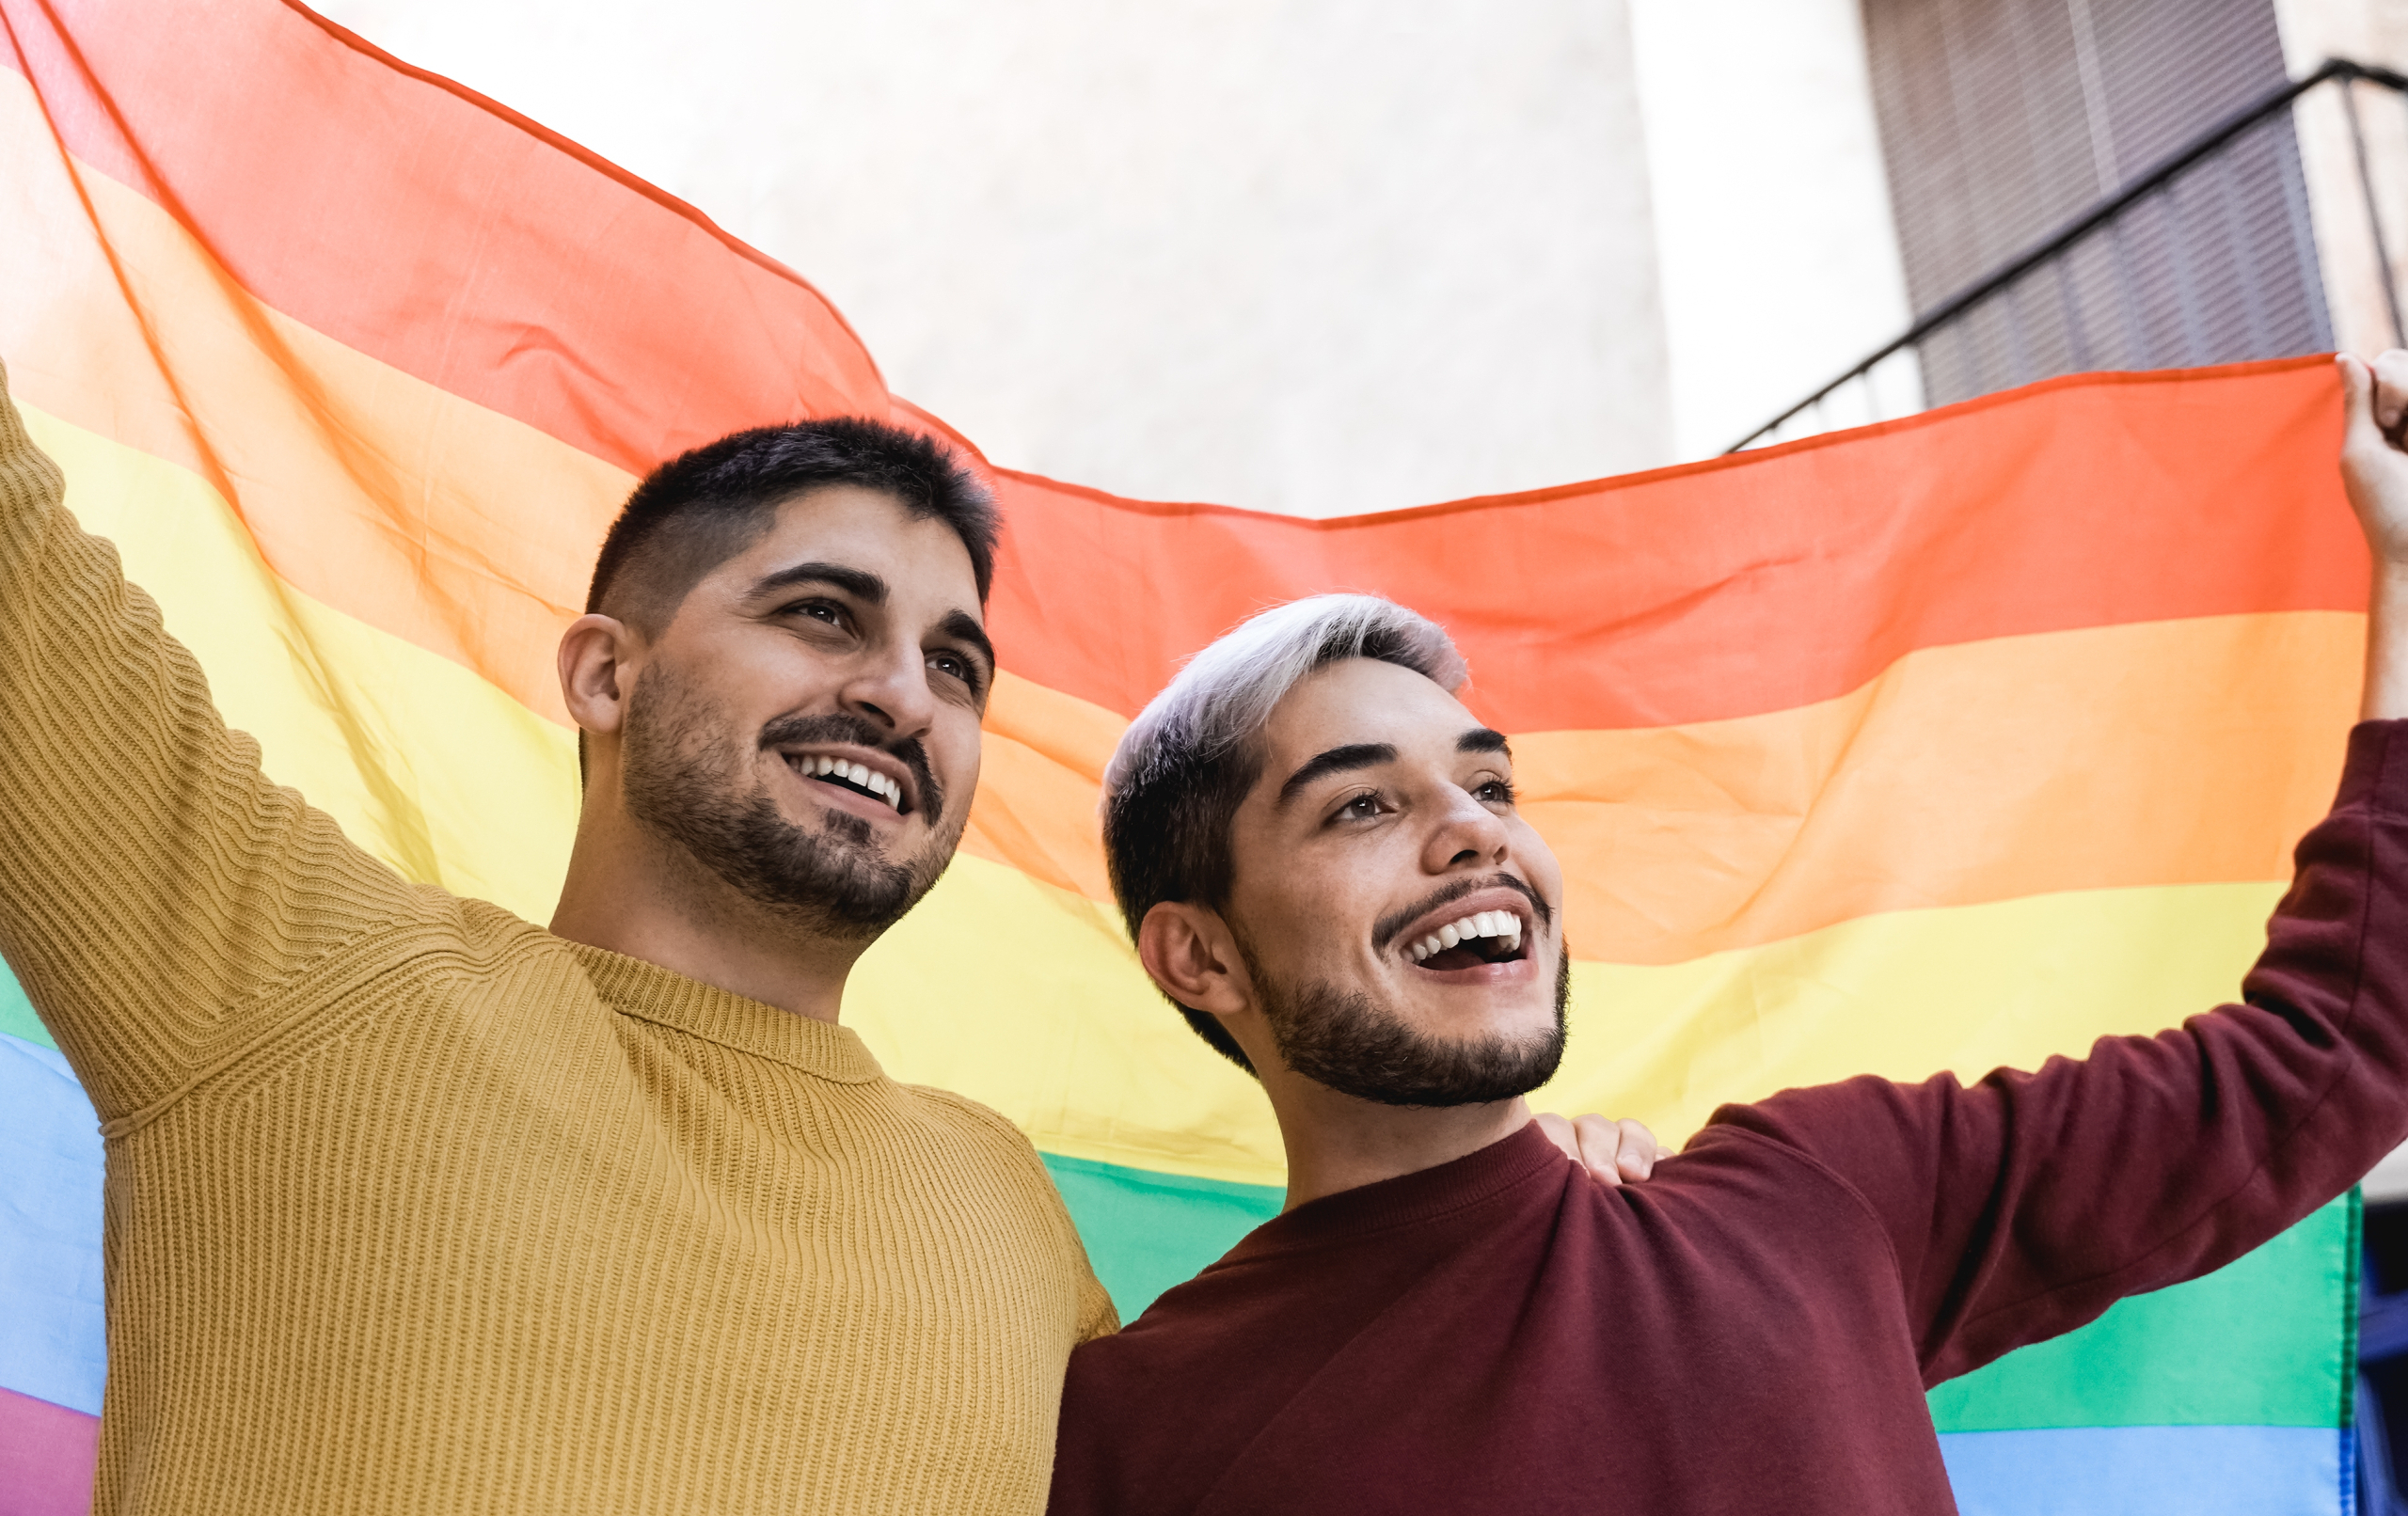 An advisor's approach to LGBTQ+ planning